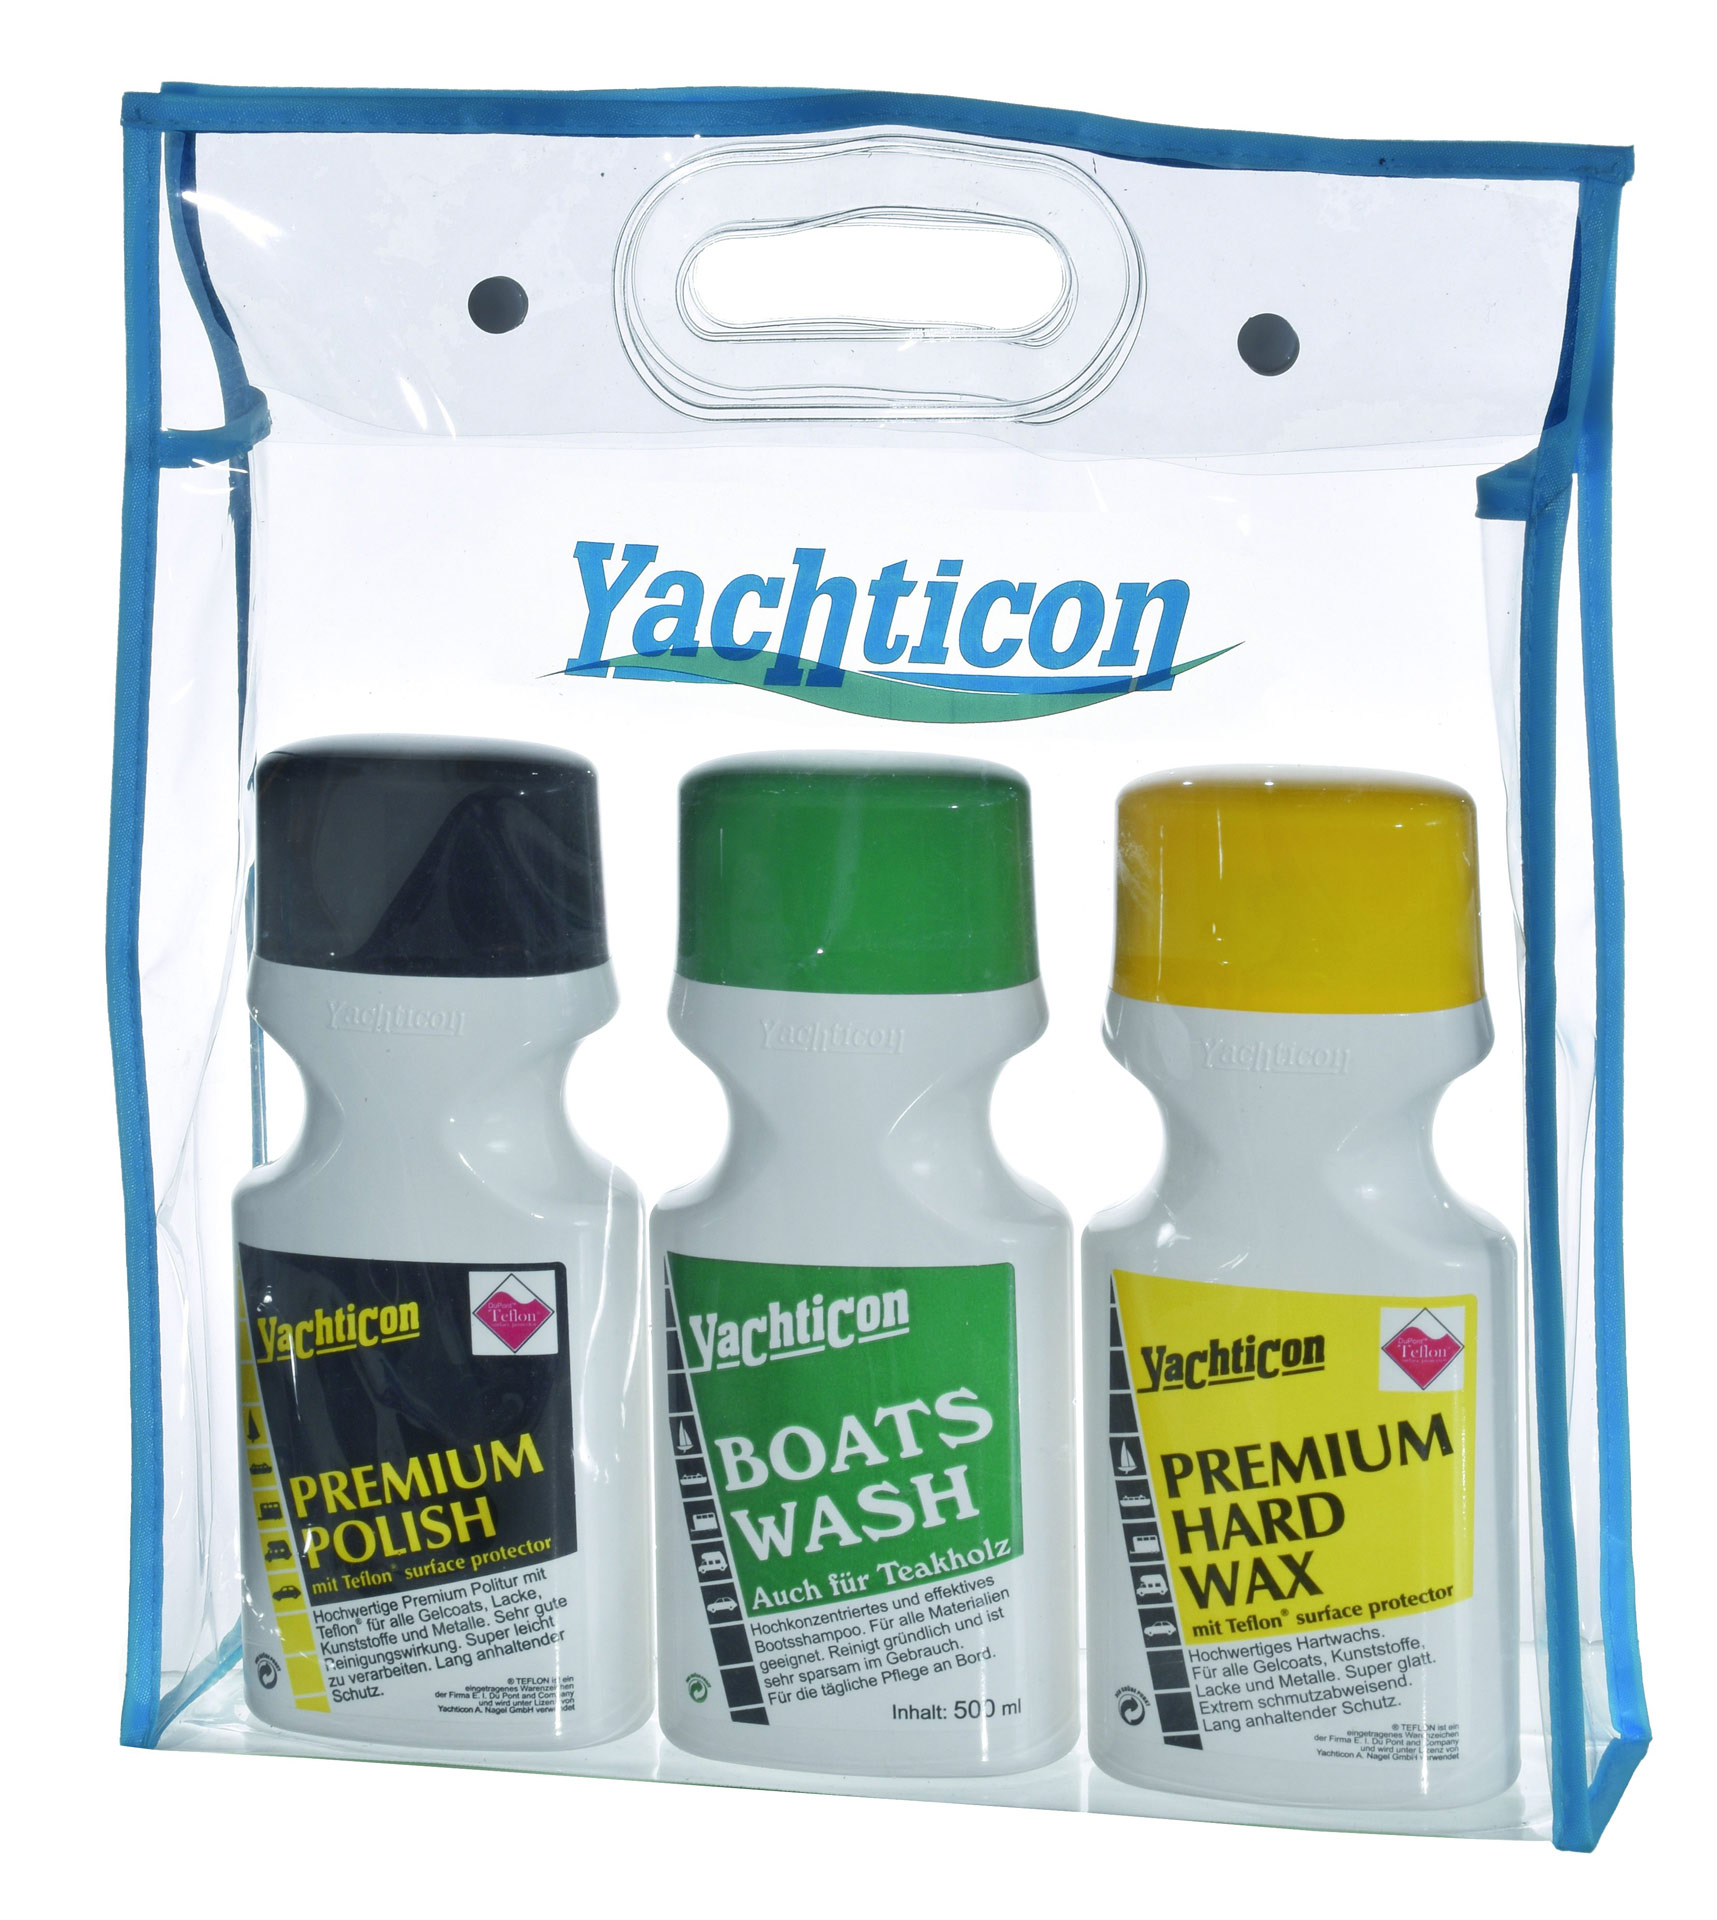 yachticon homepage